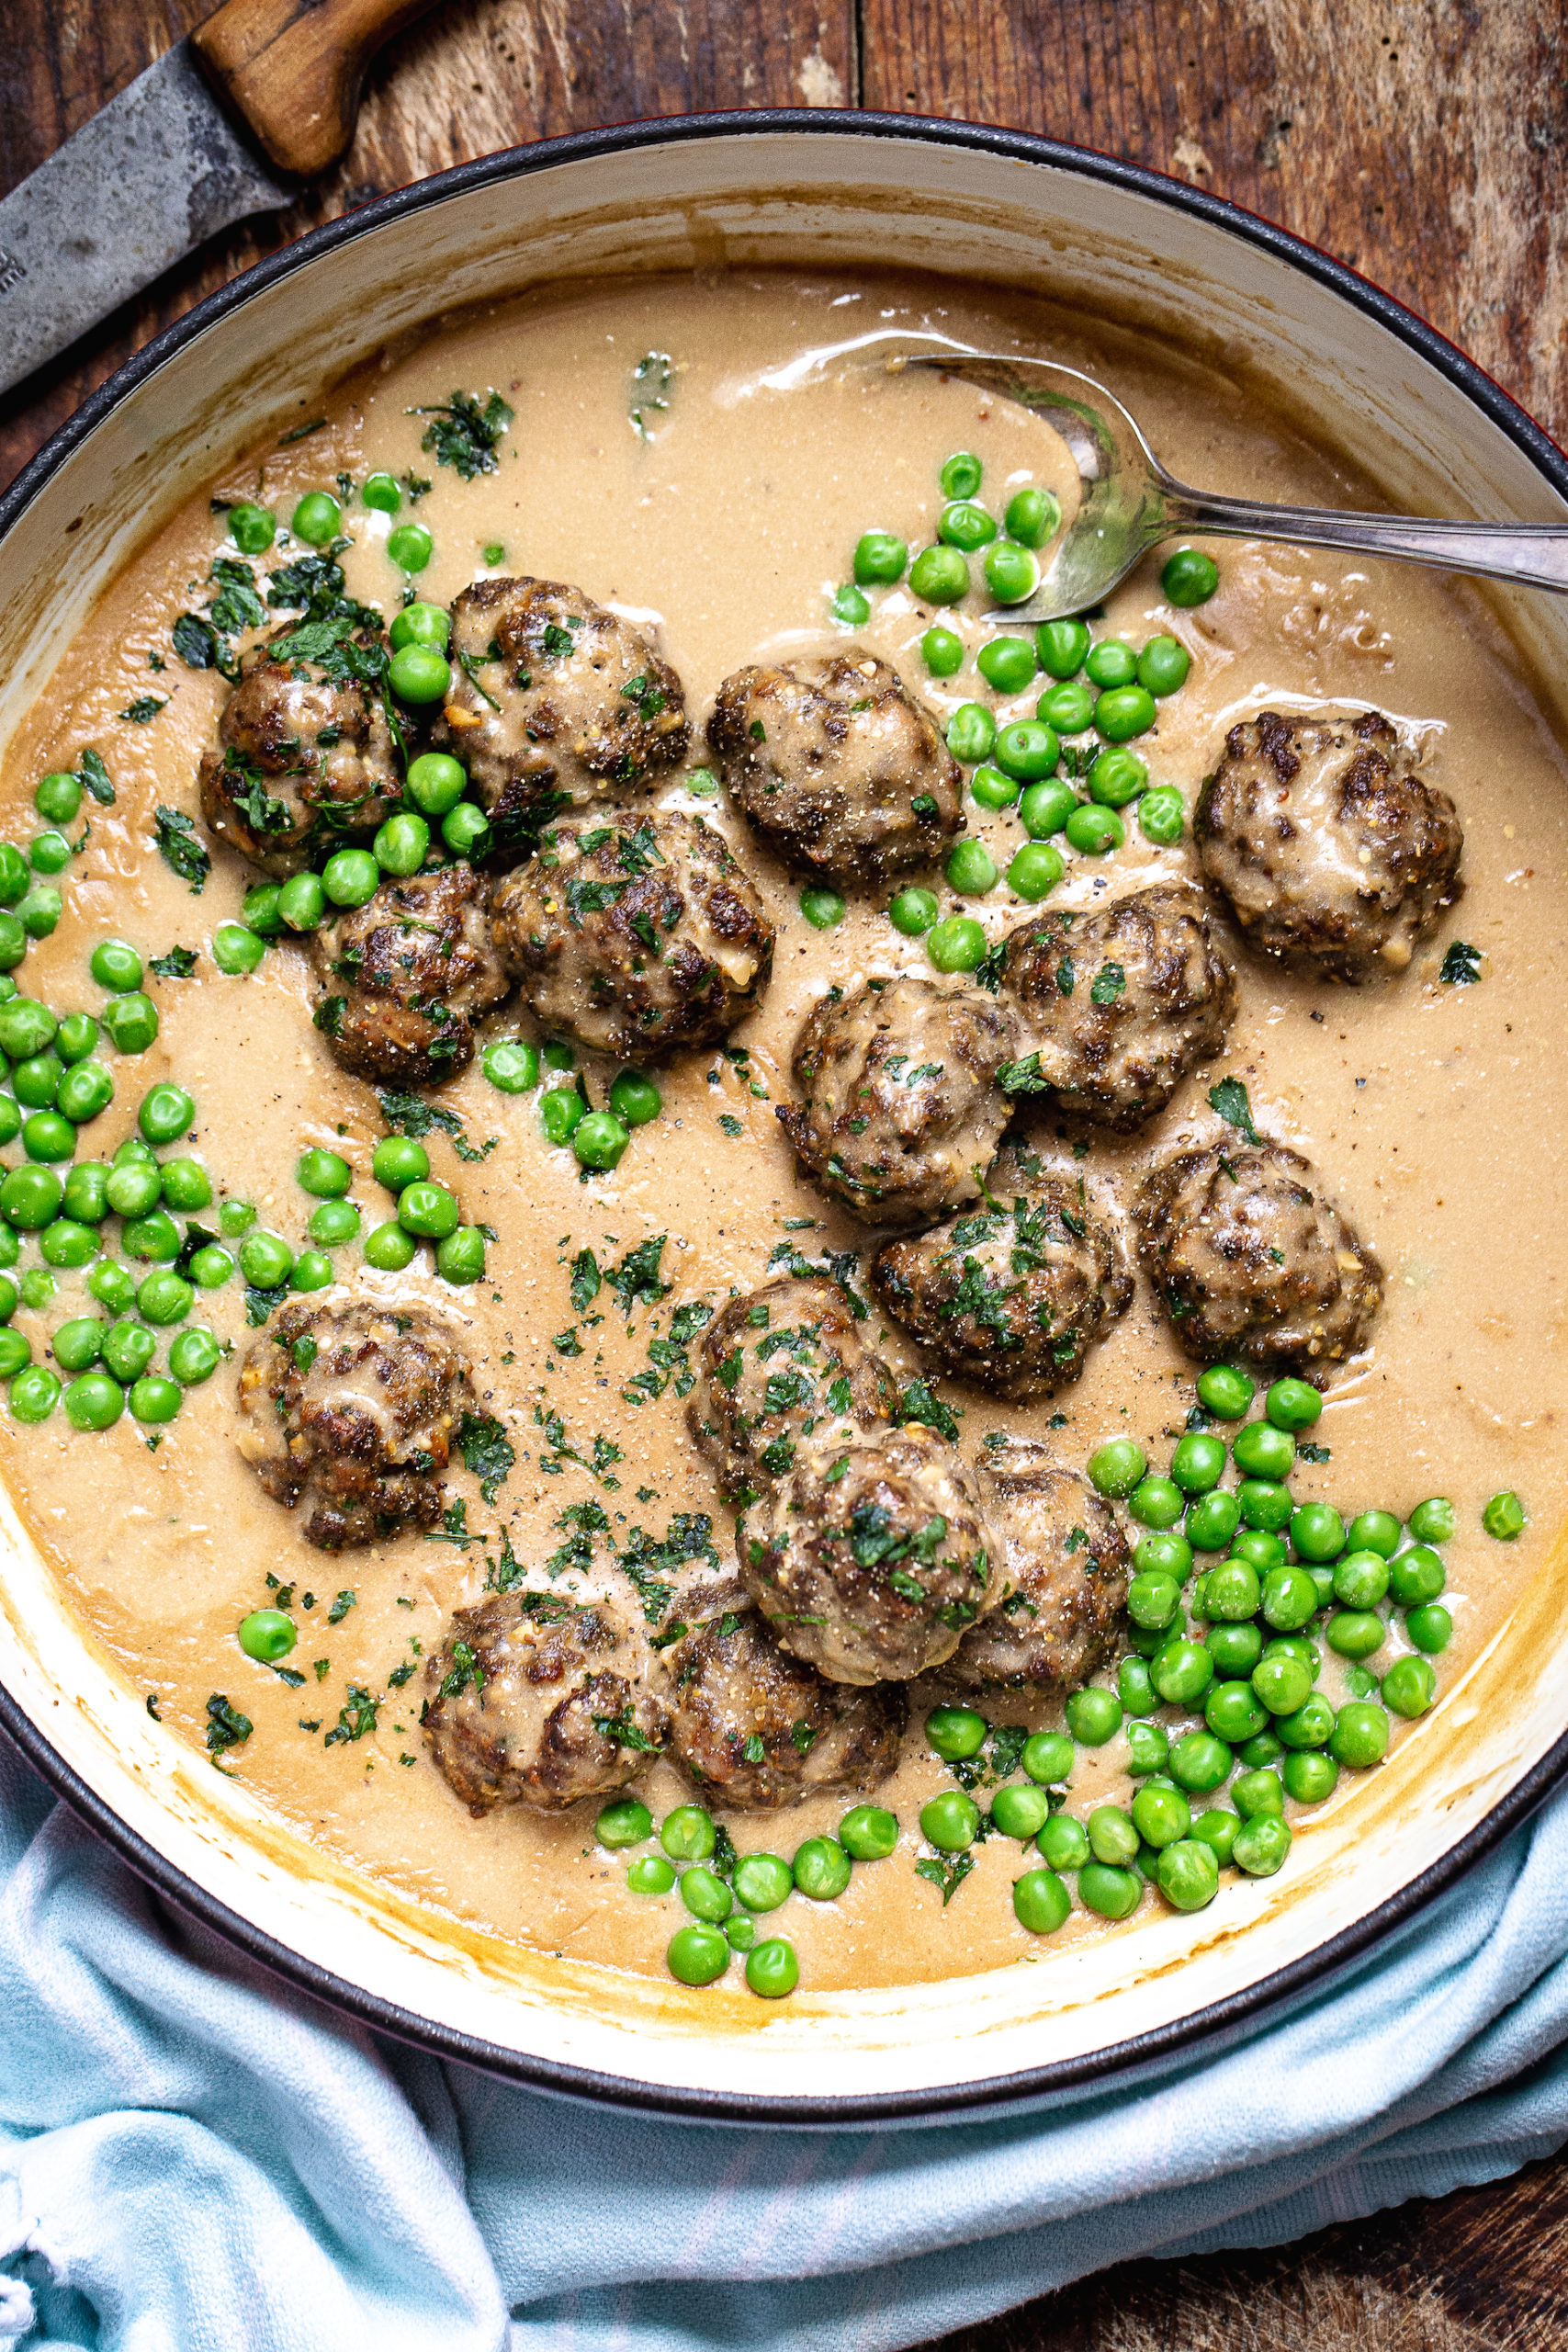 Oven Baked Swedish Meatballs Recipe (Stove Top Instructions Included)